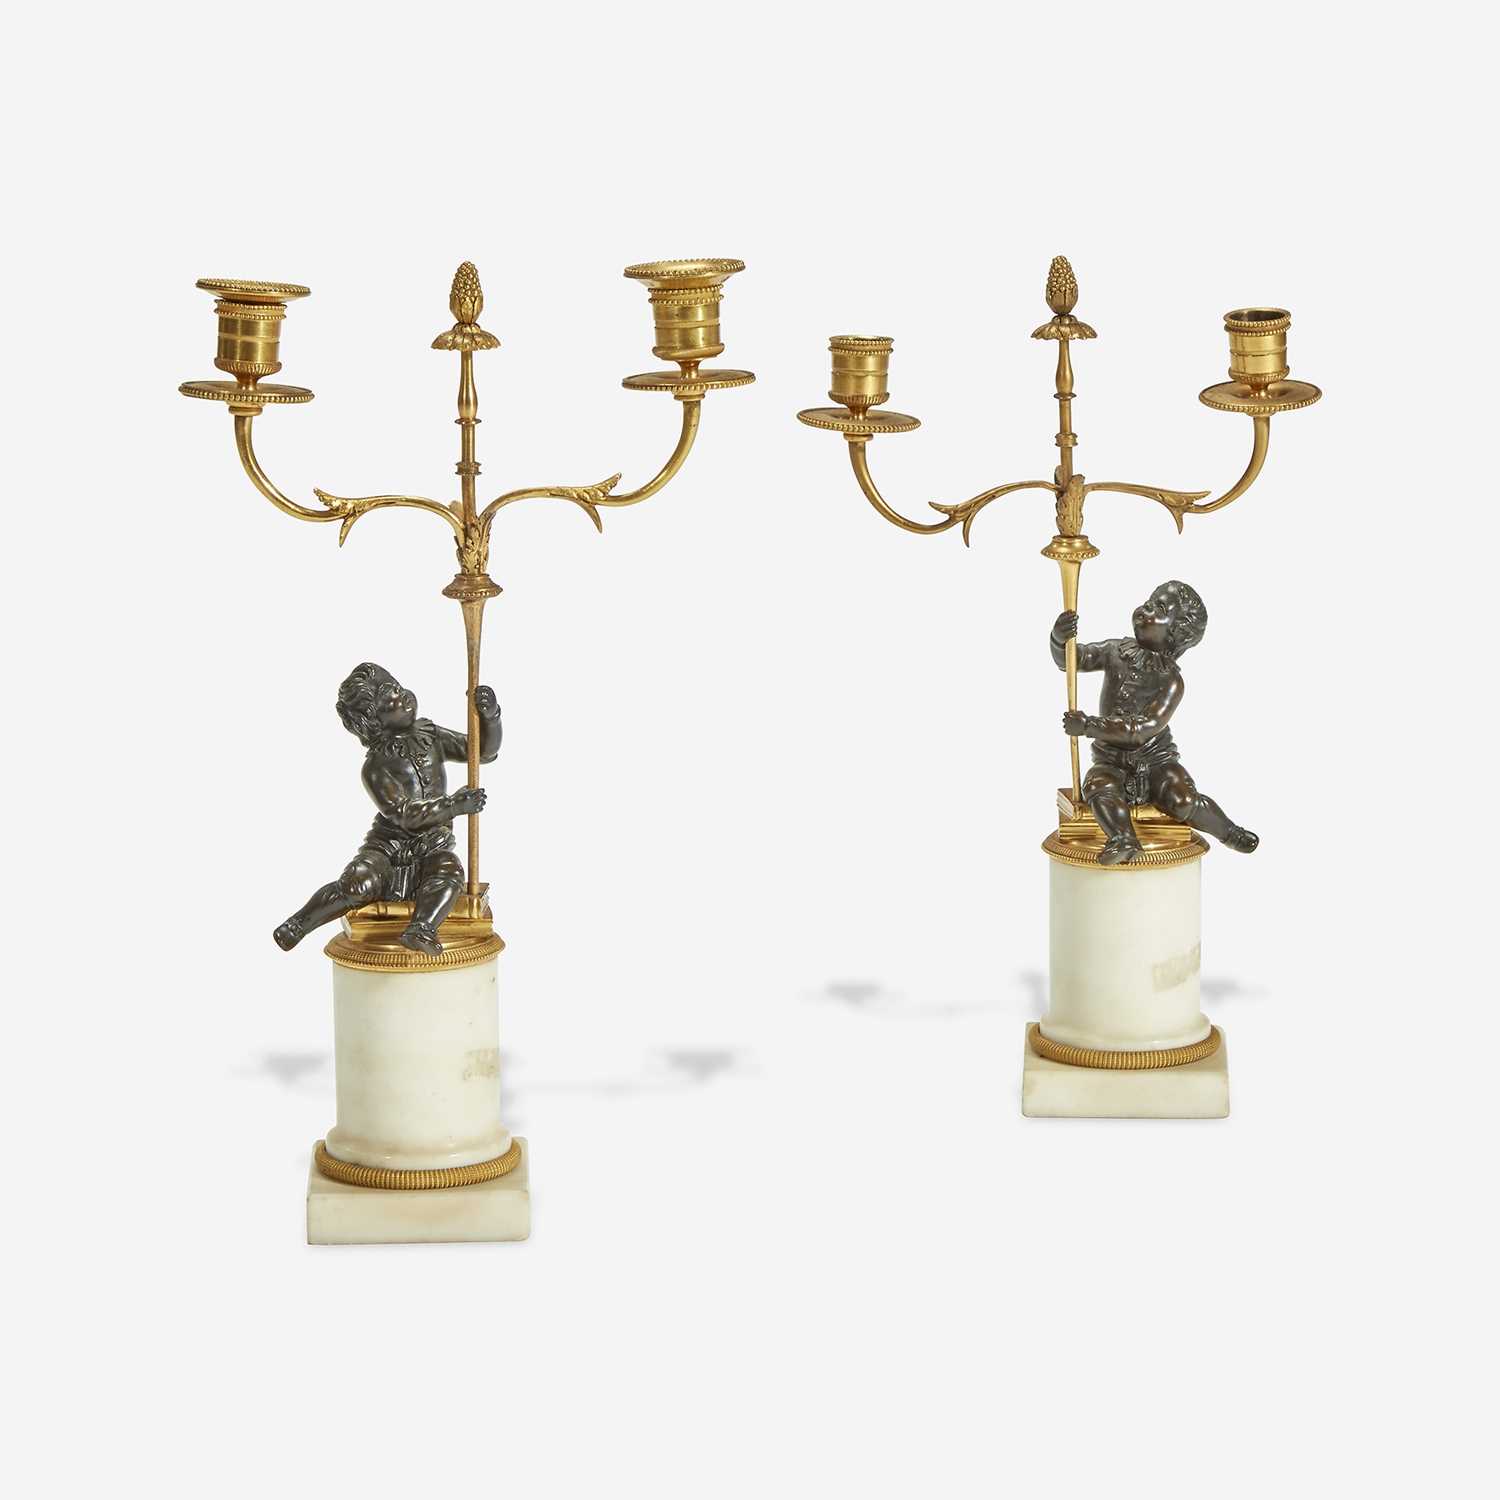 Lot 30 - A Louis XVI Style Gilt and Patinated Bronze Candelabra